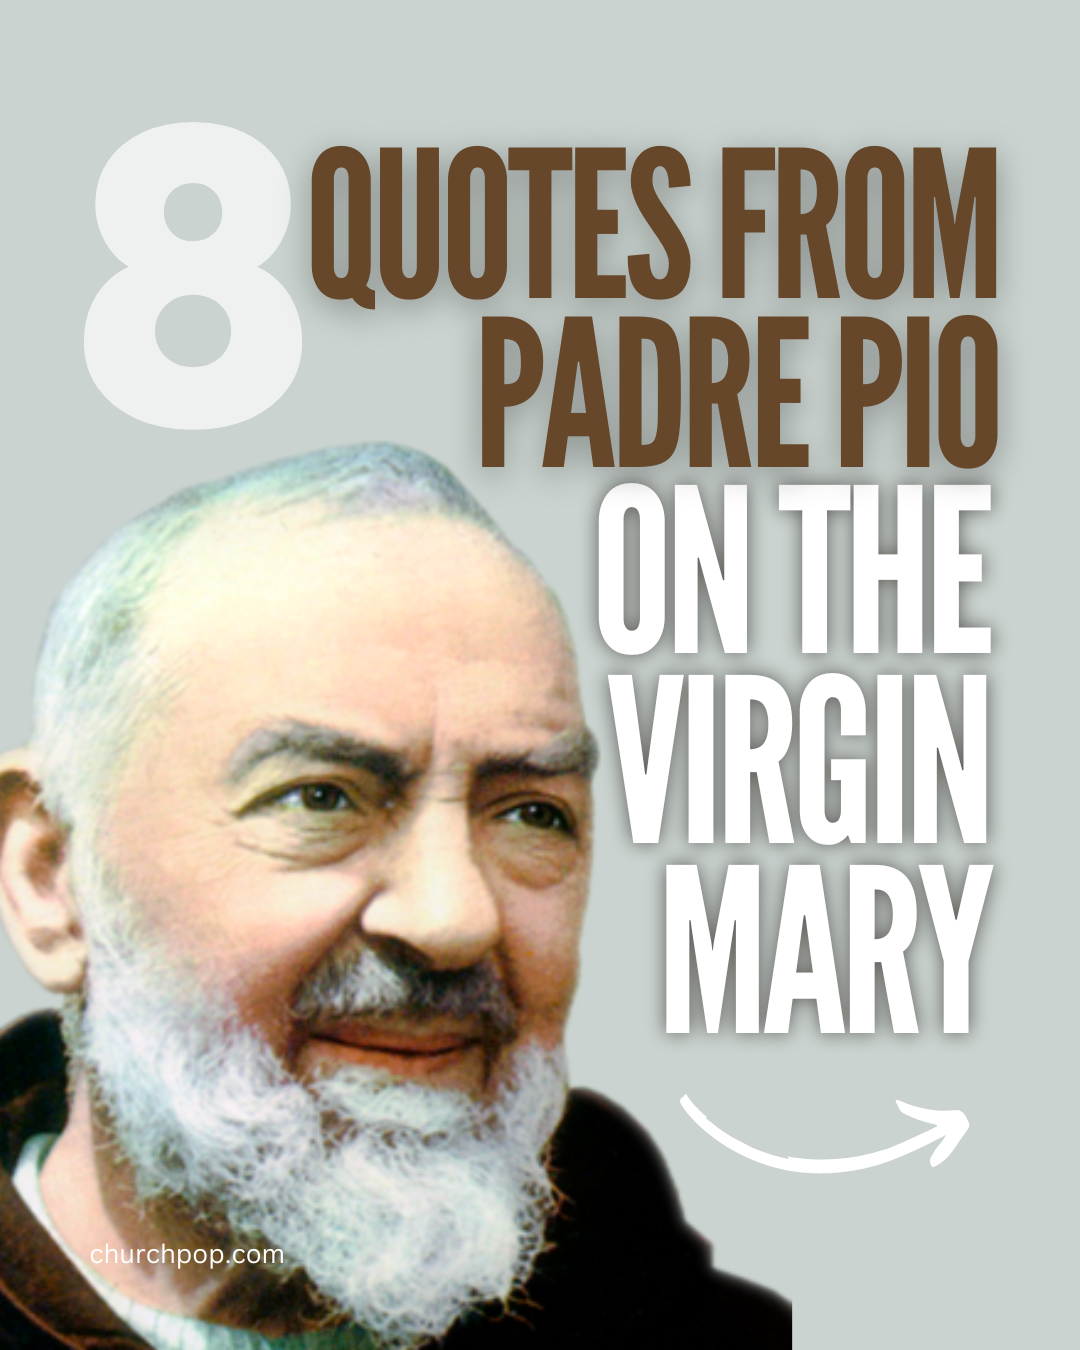 8 Padre Pio Quotes on His Incredible Devotion to the Blessed Virgin Mary